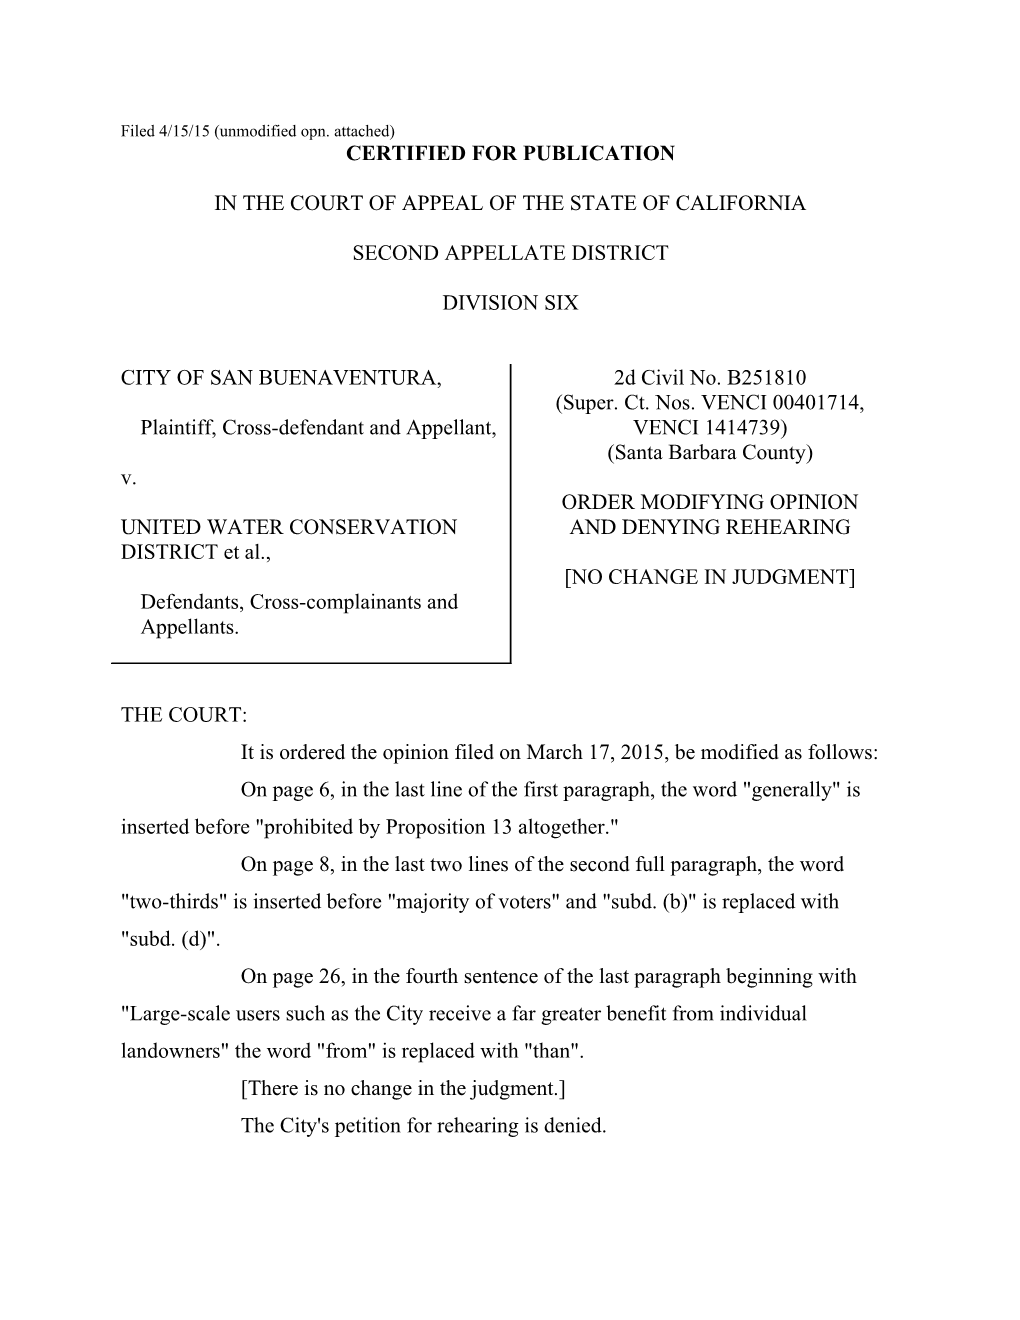 Filed 4/15/15 (Unmodified Opn. Attached)